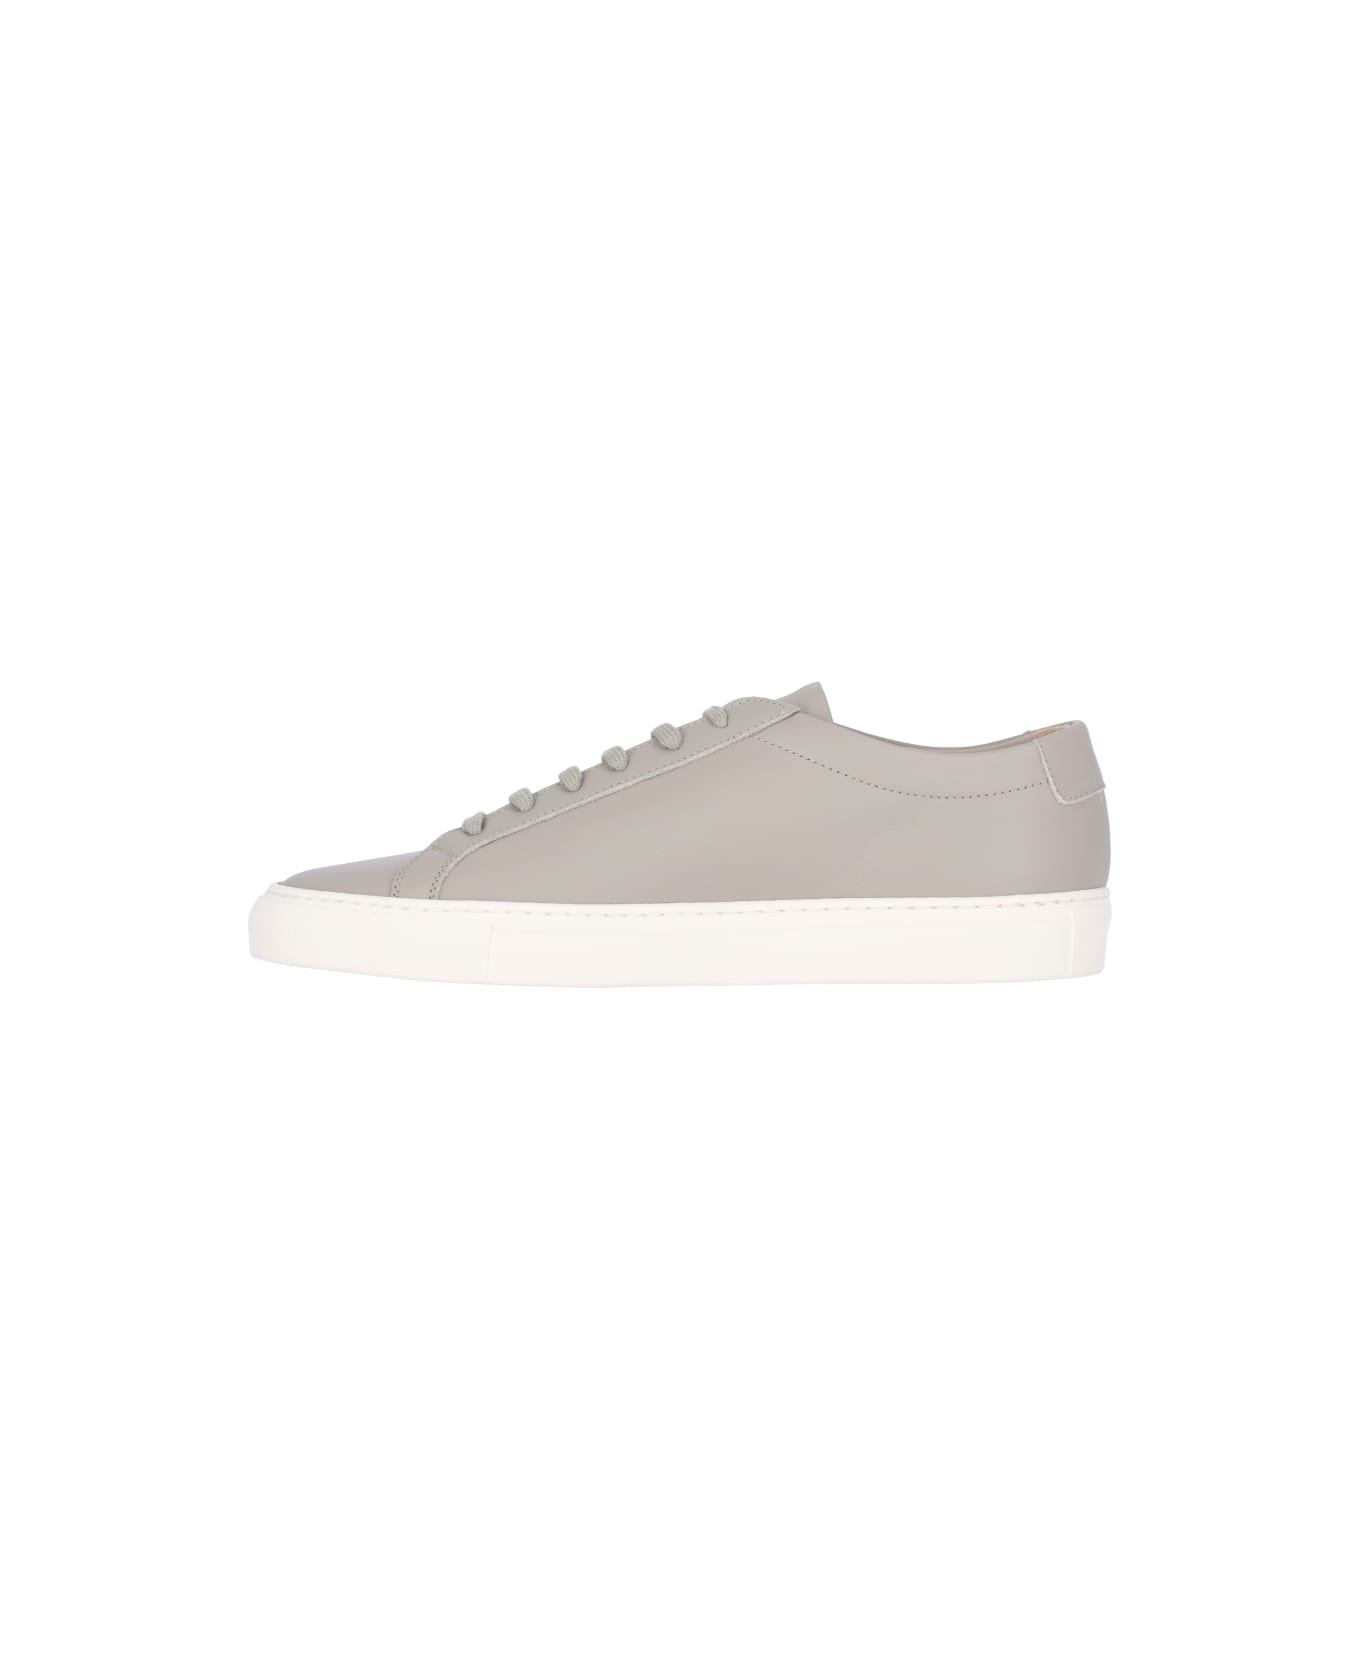 Common Projects Original Achilles Low Sneakers - Grey